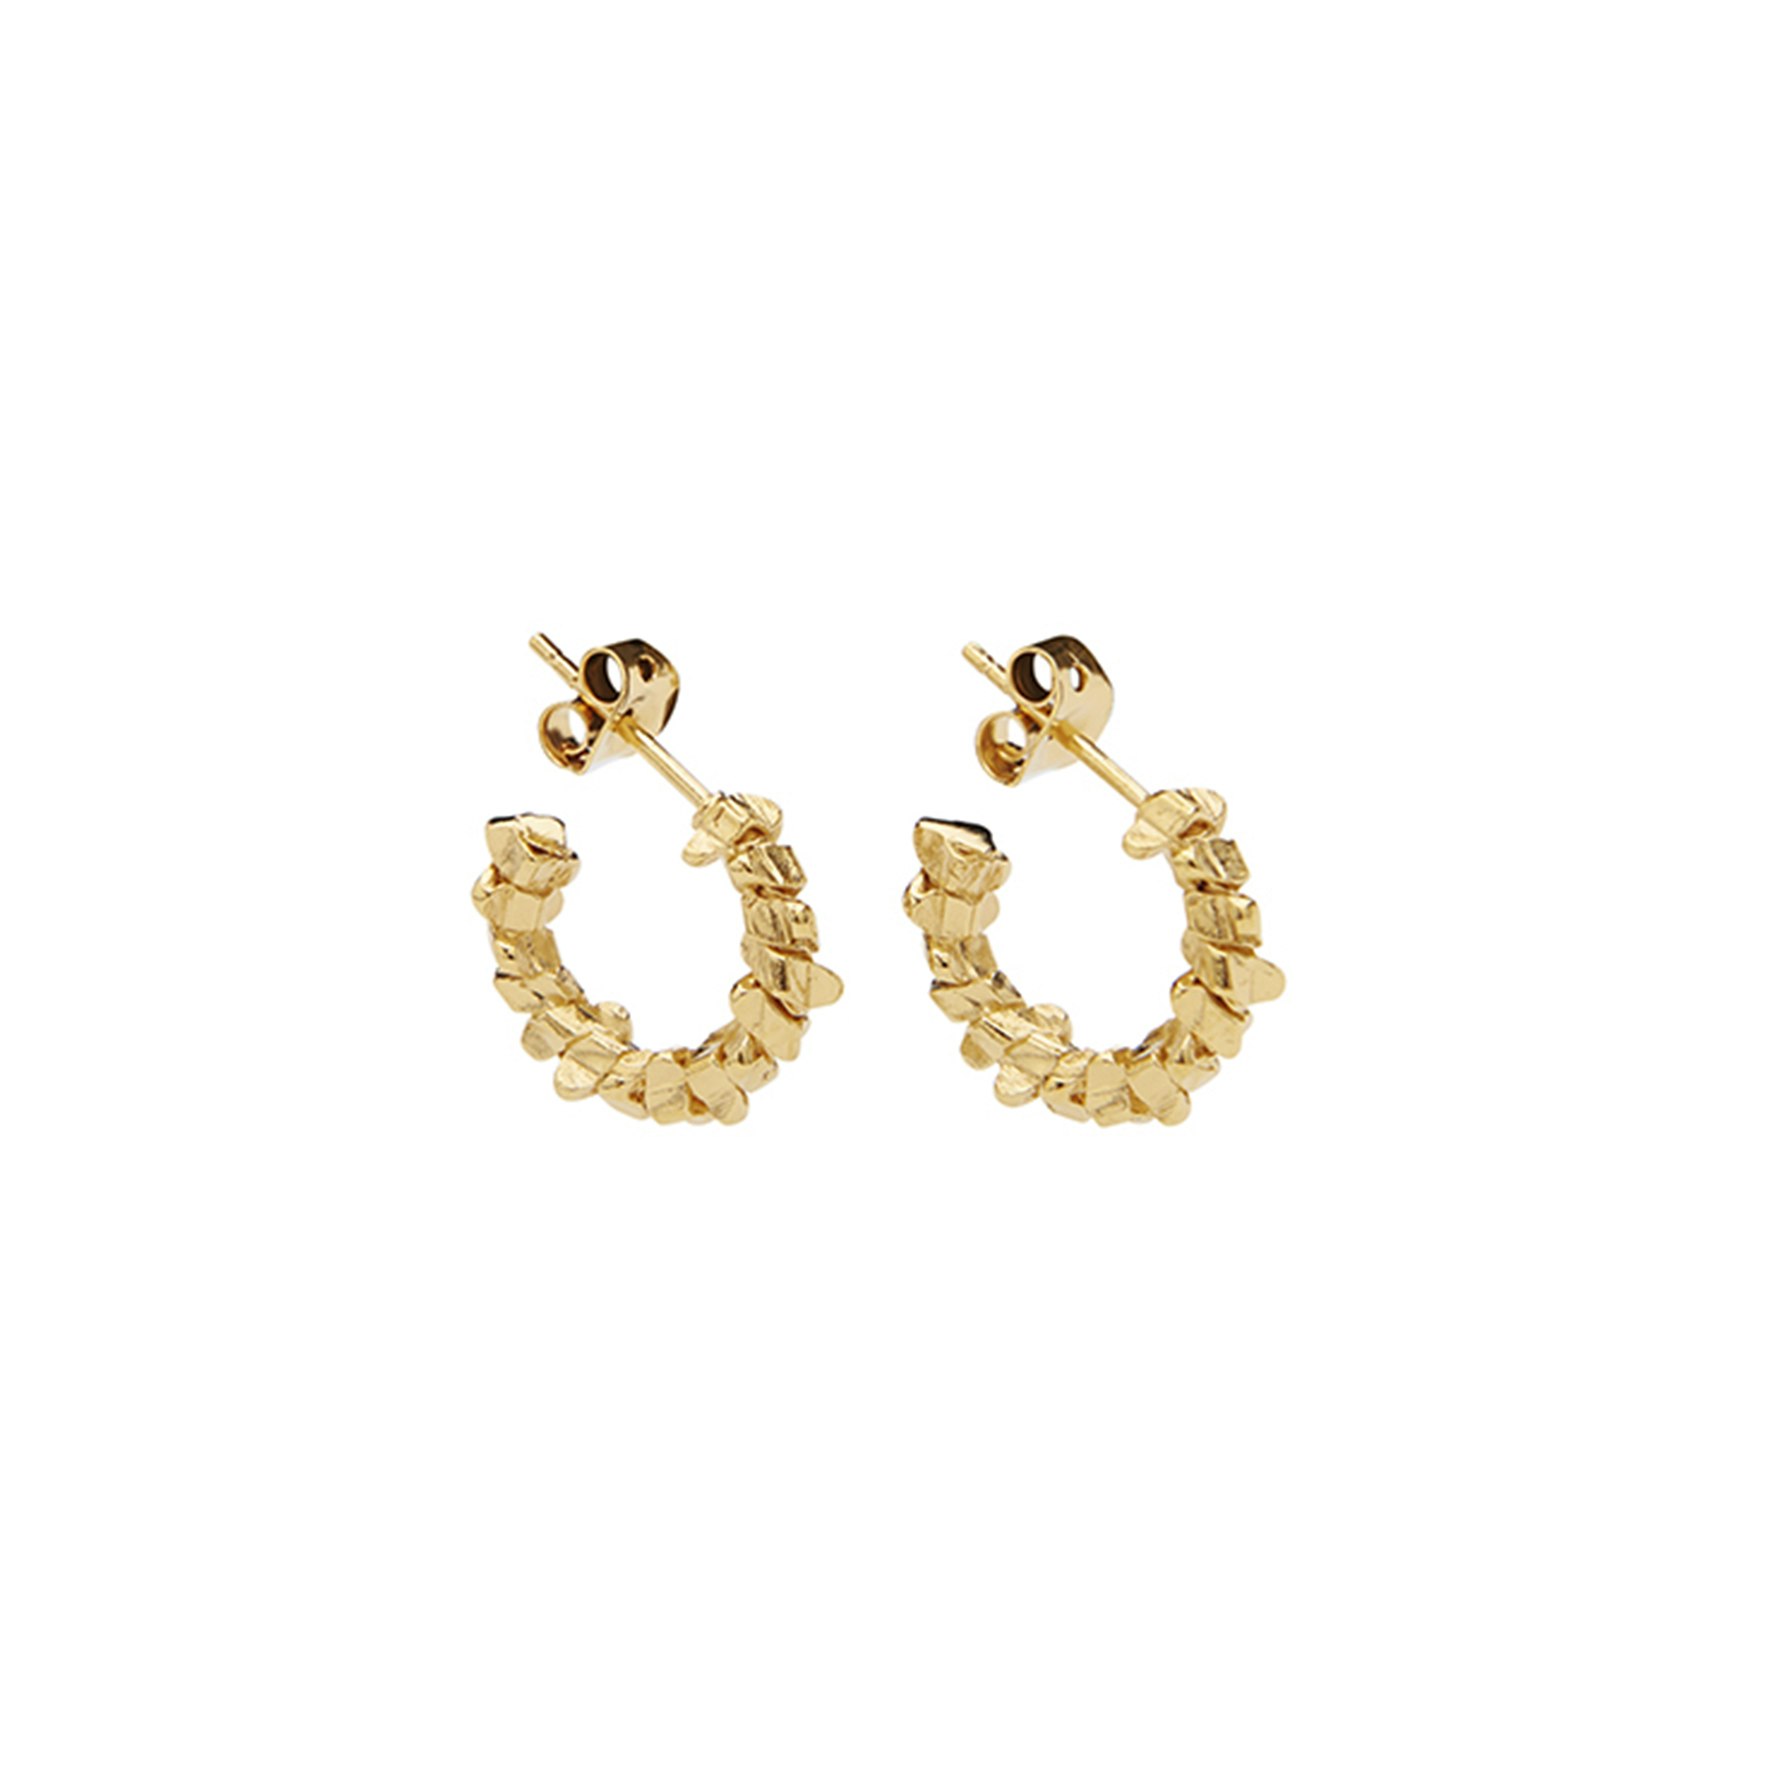 Astrid Studs from Pico in Goldplated-Silver Sterling 925